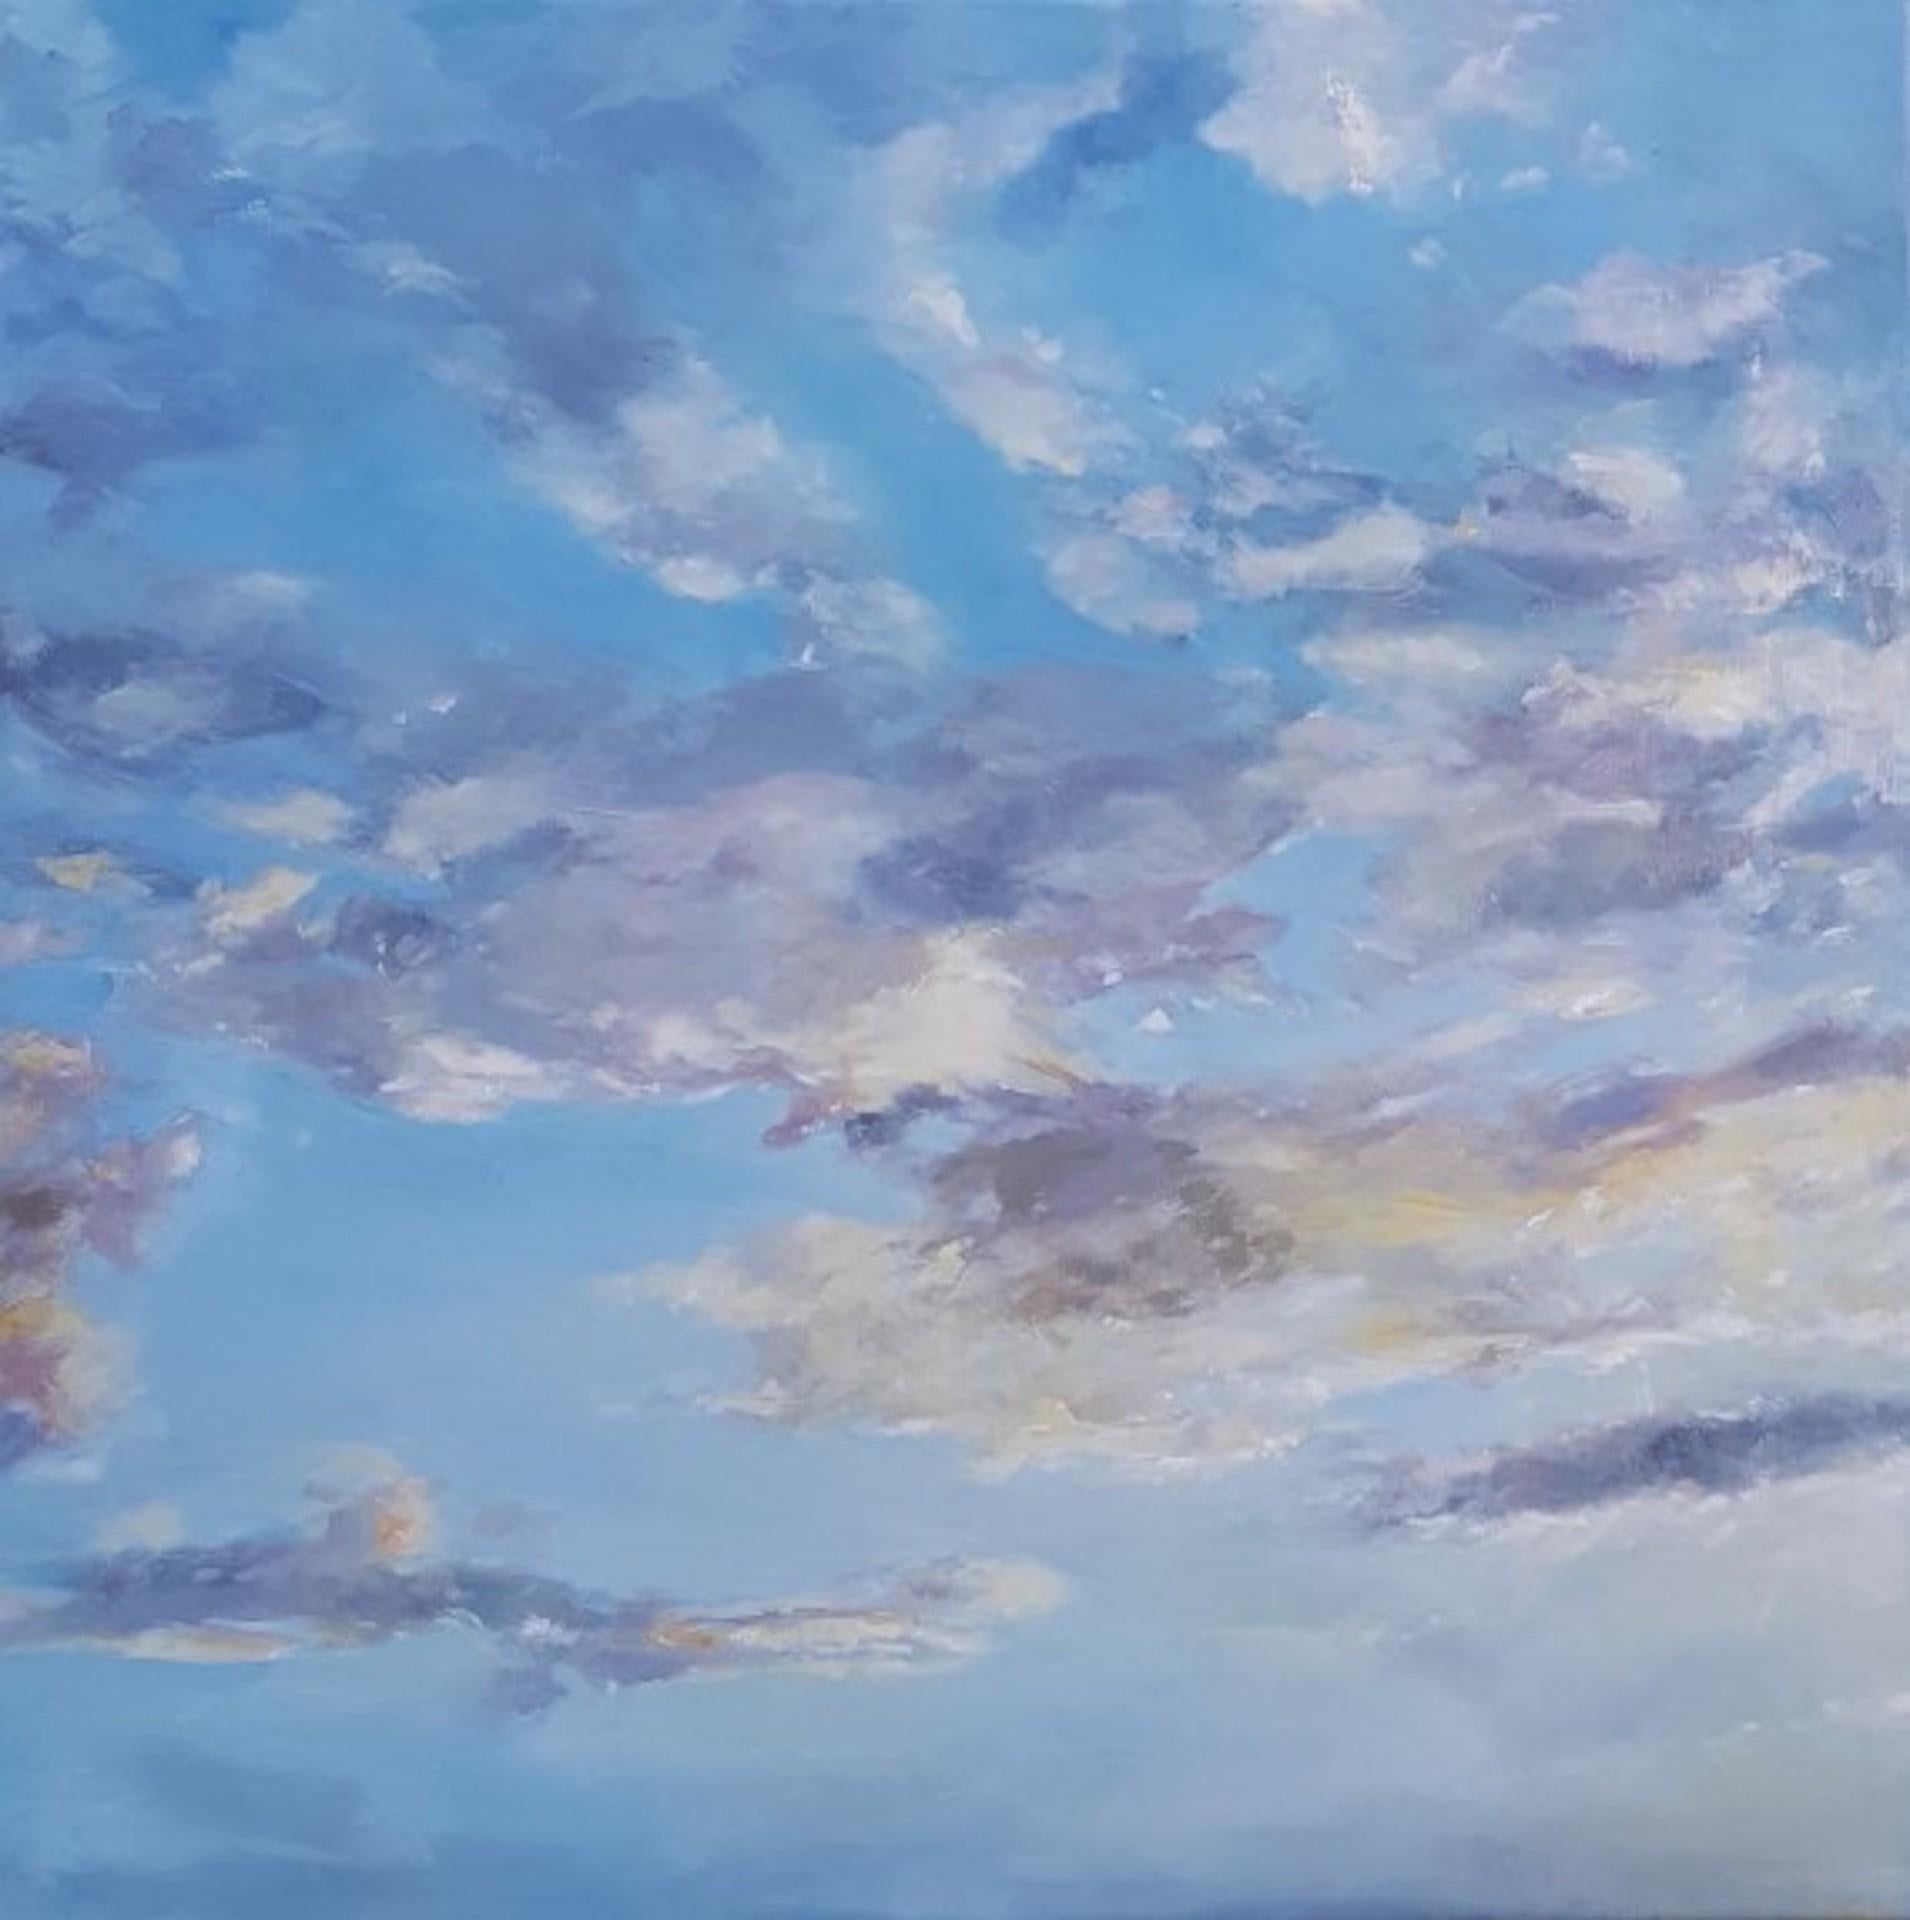 Stephen Kinder, Clearing Skies, Original Landscape Painting, Contemporary Art